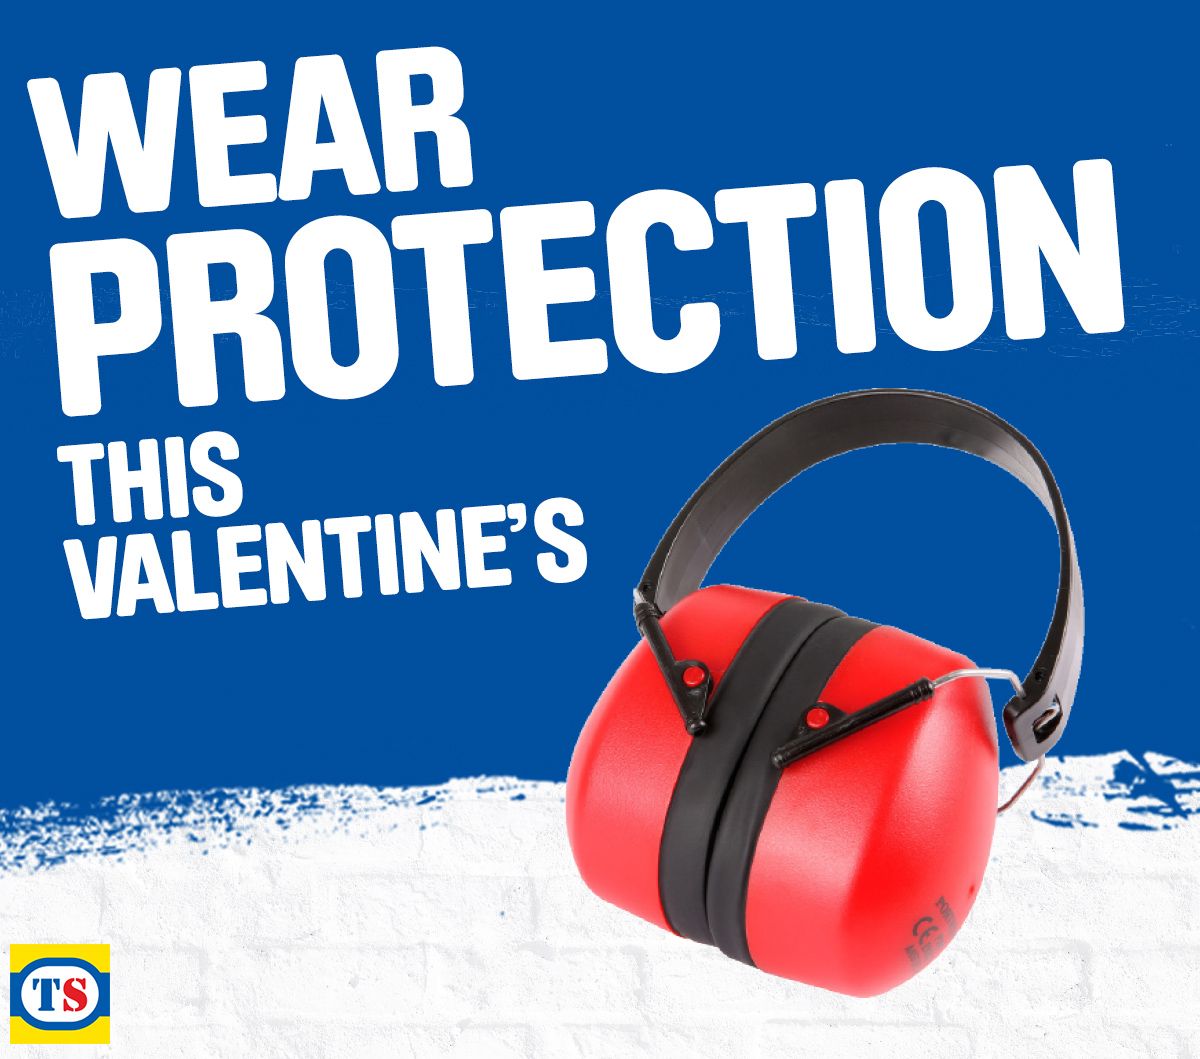 Wear protection this Valentine's